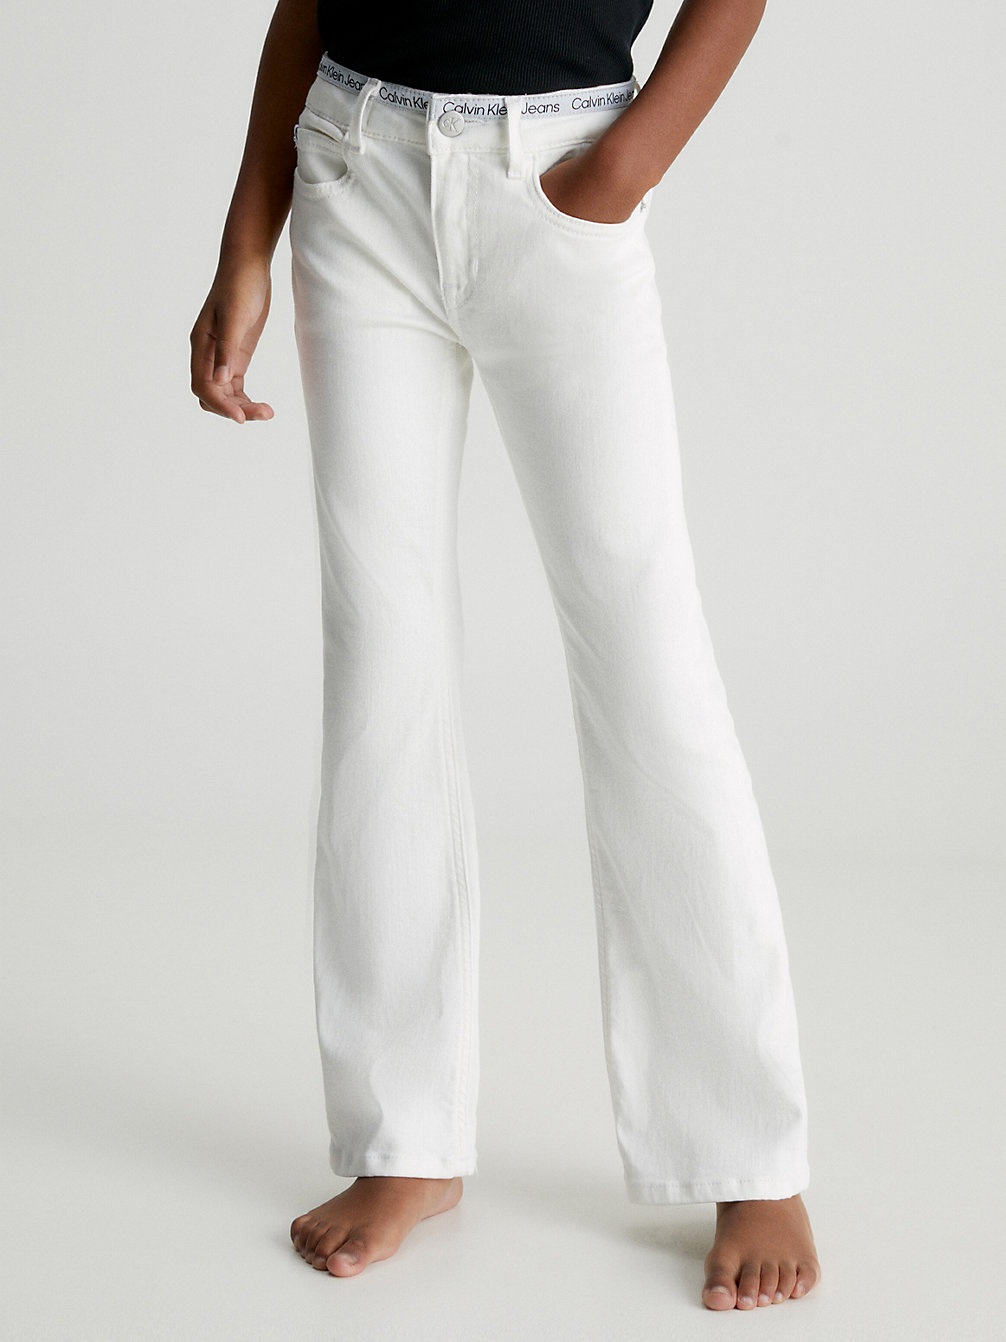 WHITE STRETCH TAPE > Mid Rise Flared Jeans > undefined Maedchen - Calvin Klein